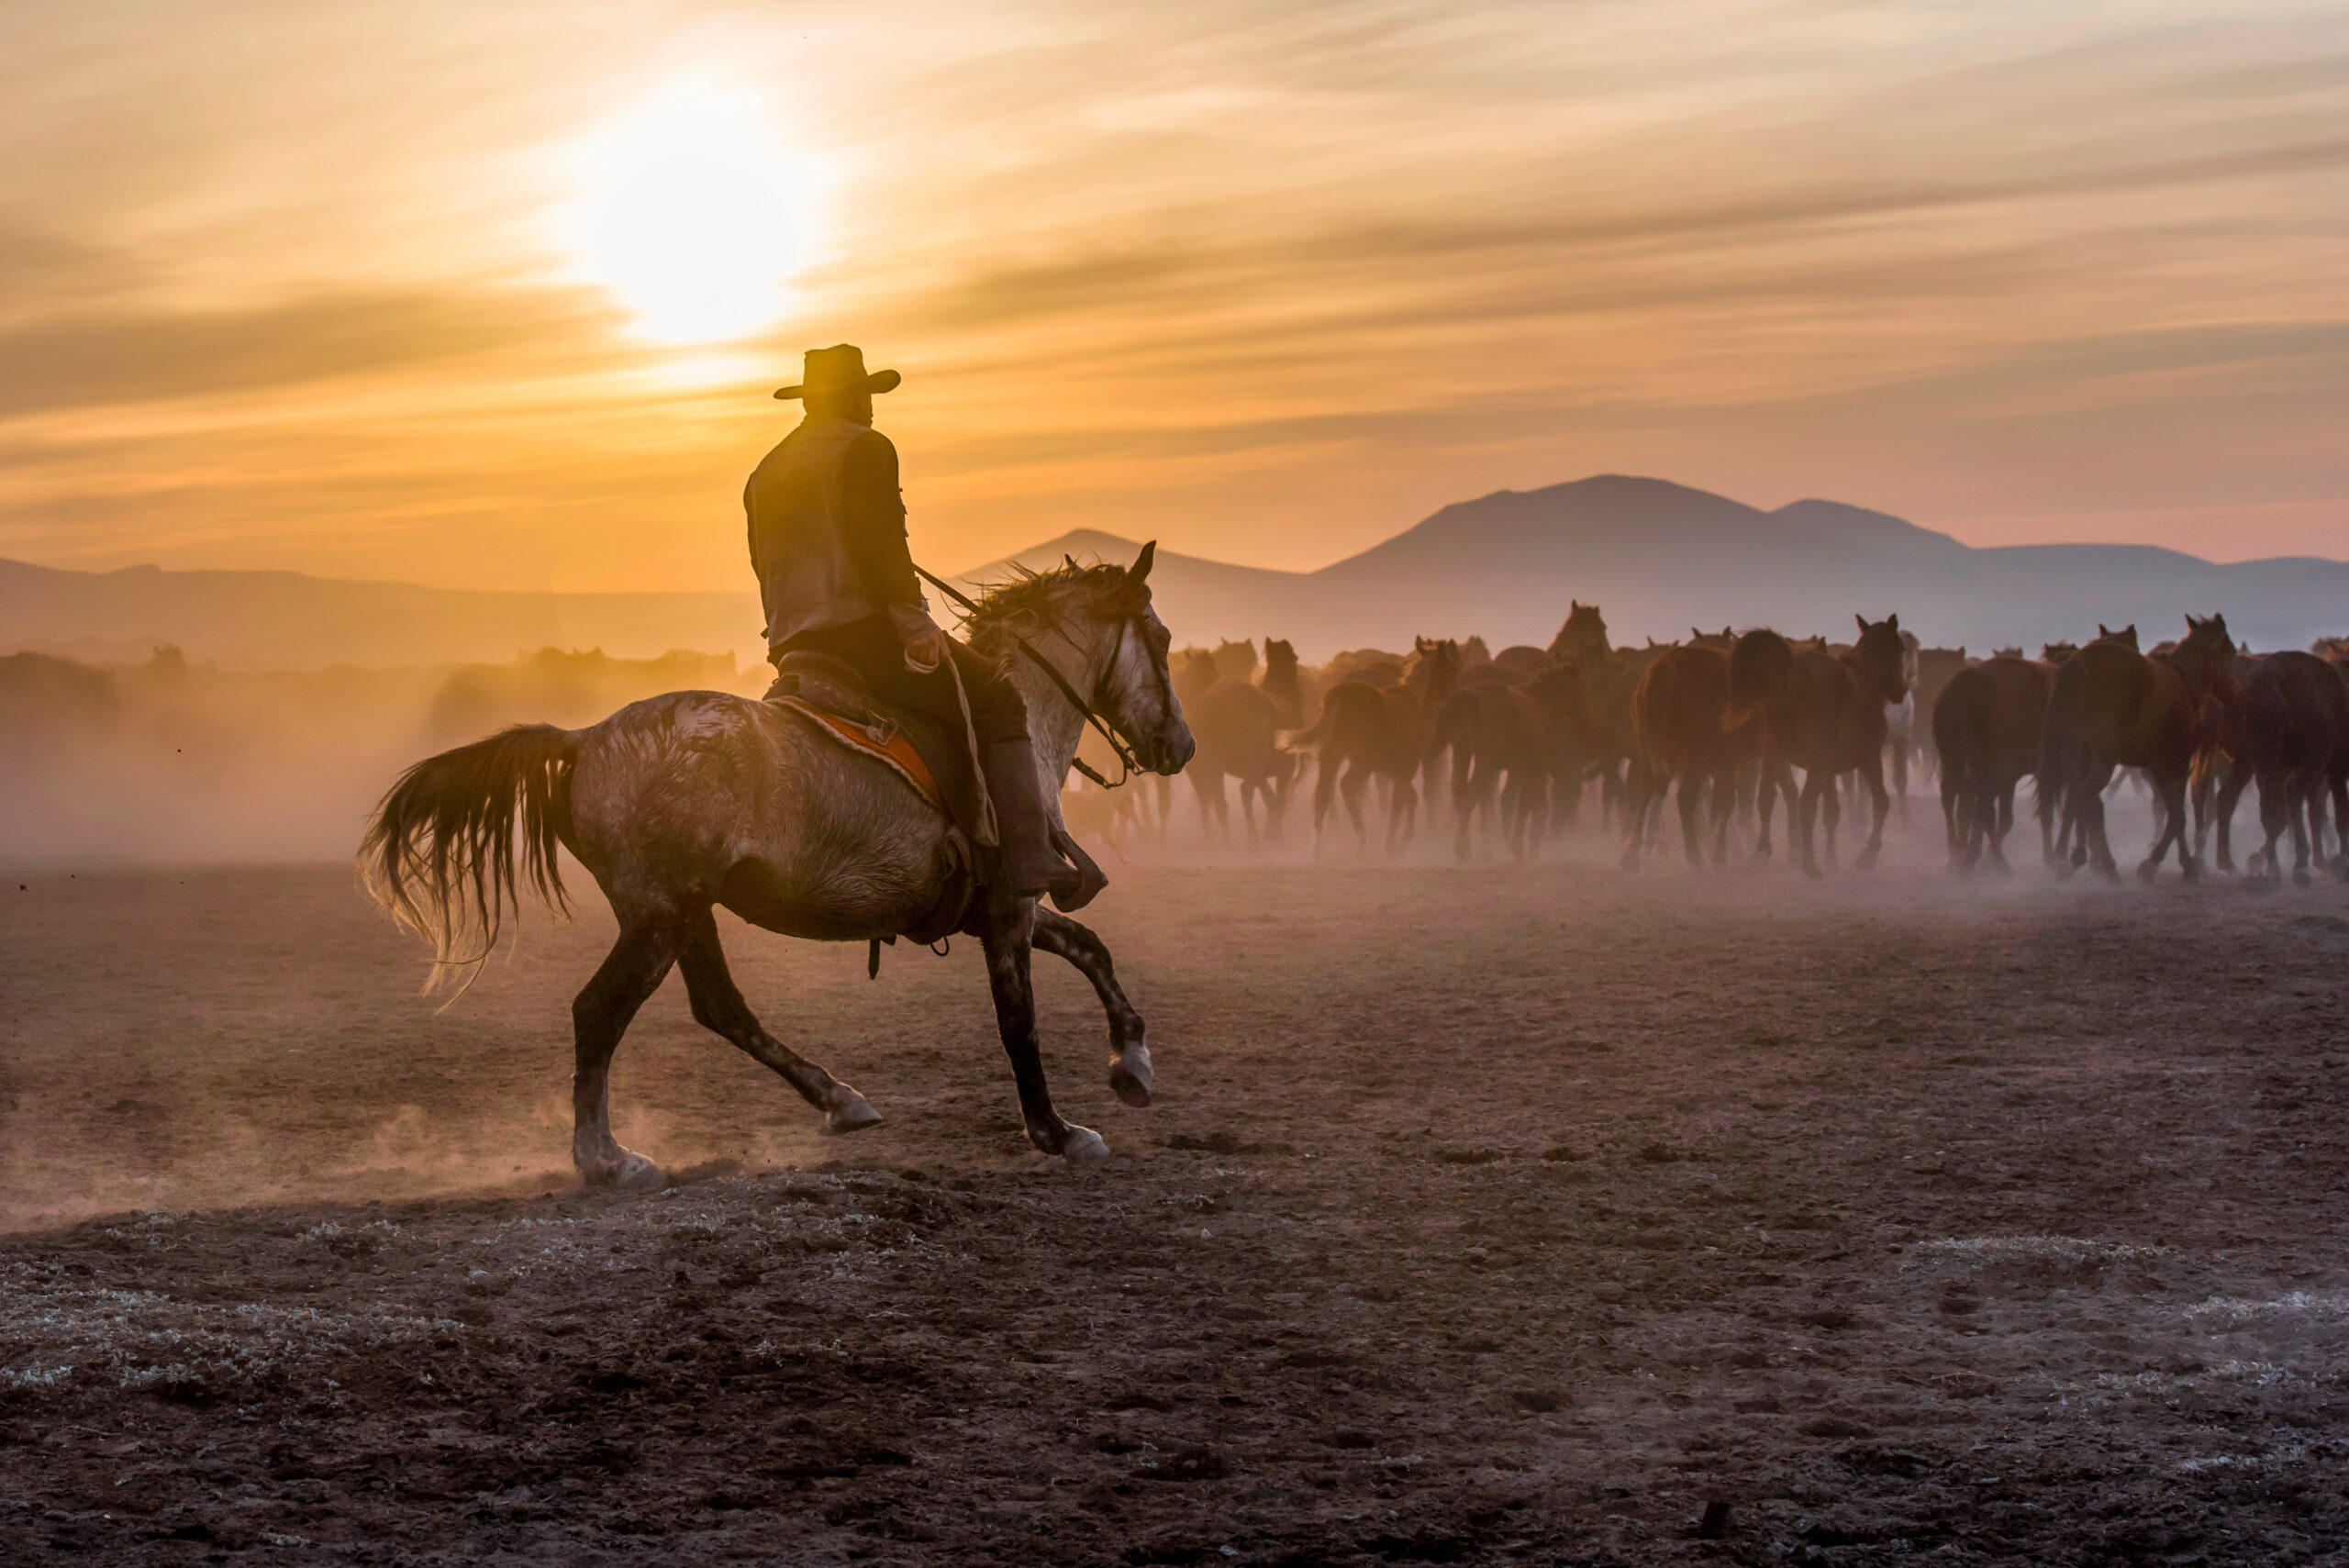 Image of a cowboy on a horse, looking rugged, herding horses against a backdrop of mountains at sunset